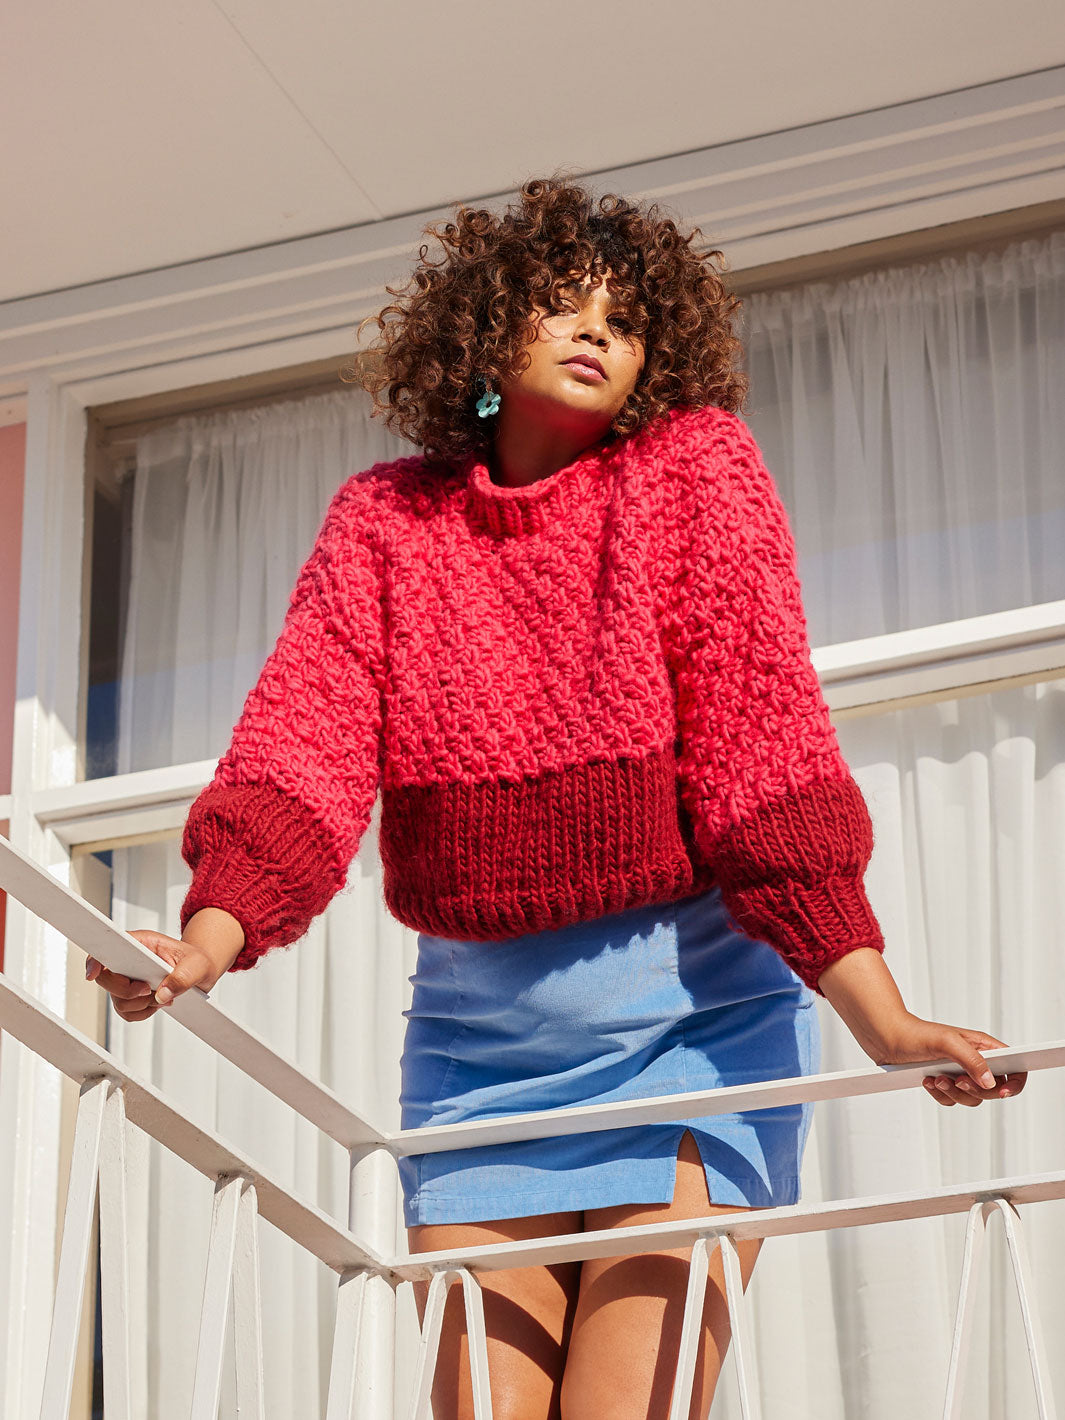 Girl stands over balcony wearing a skirt and chunky knitted Cardigang jumper